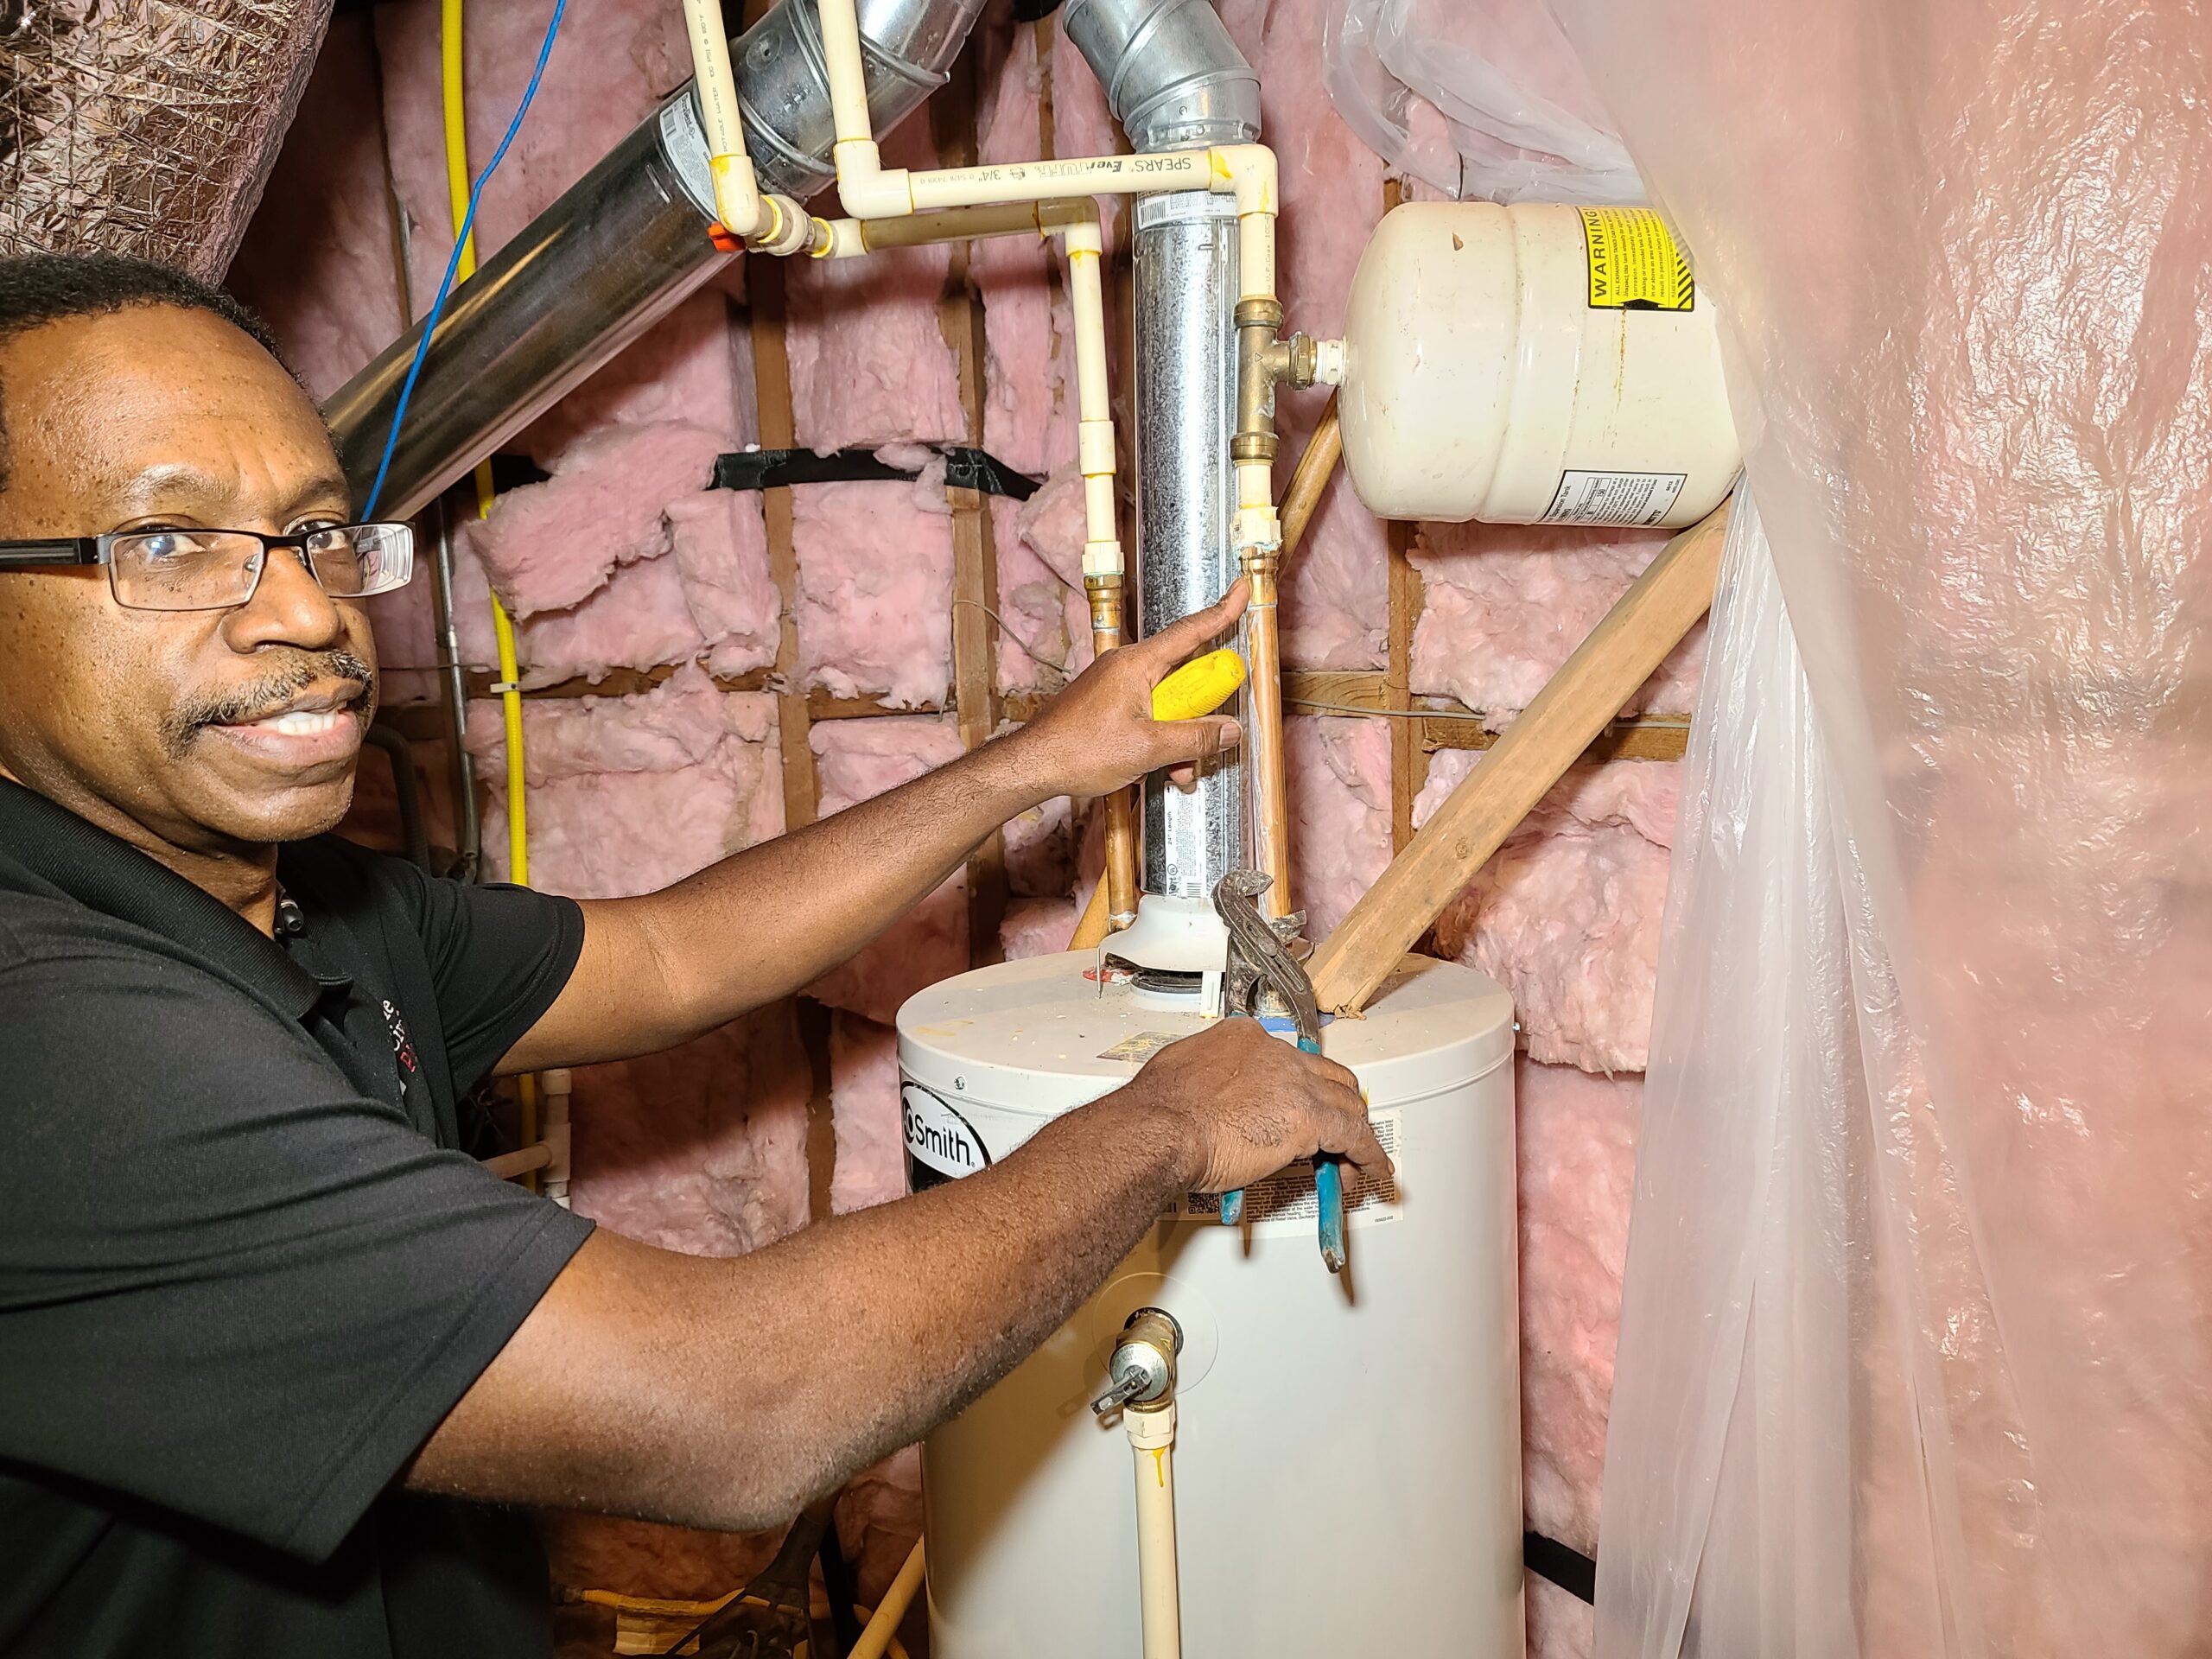 Dale Johnson of the Civilized Plumber working on a water heater